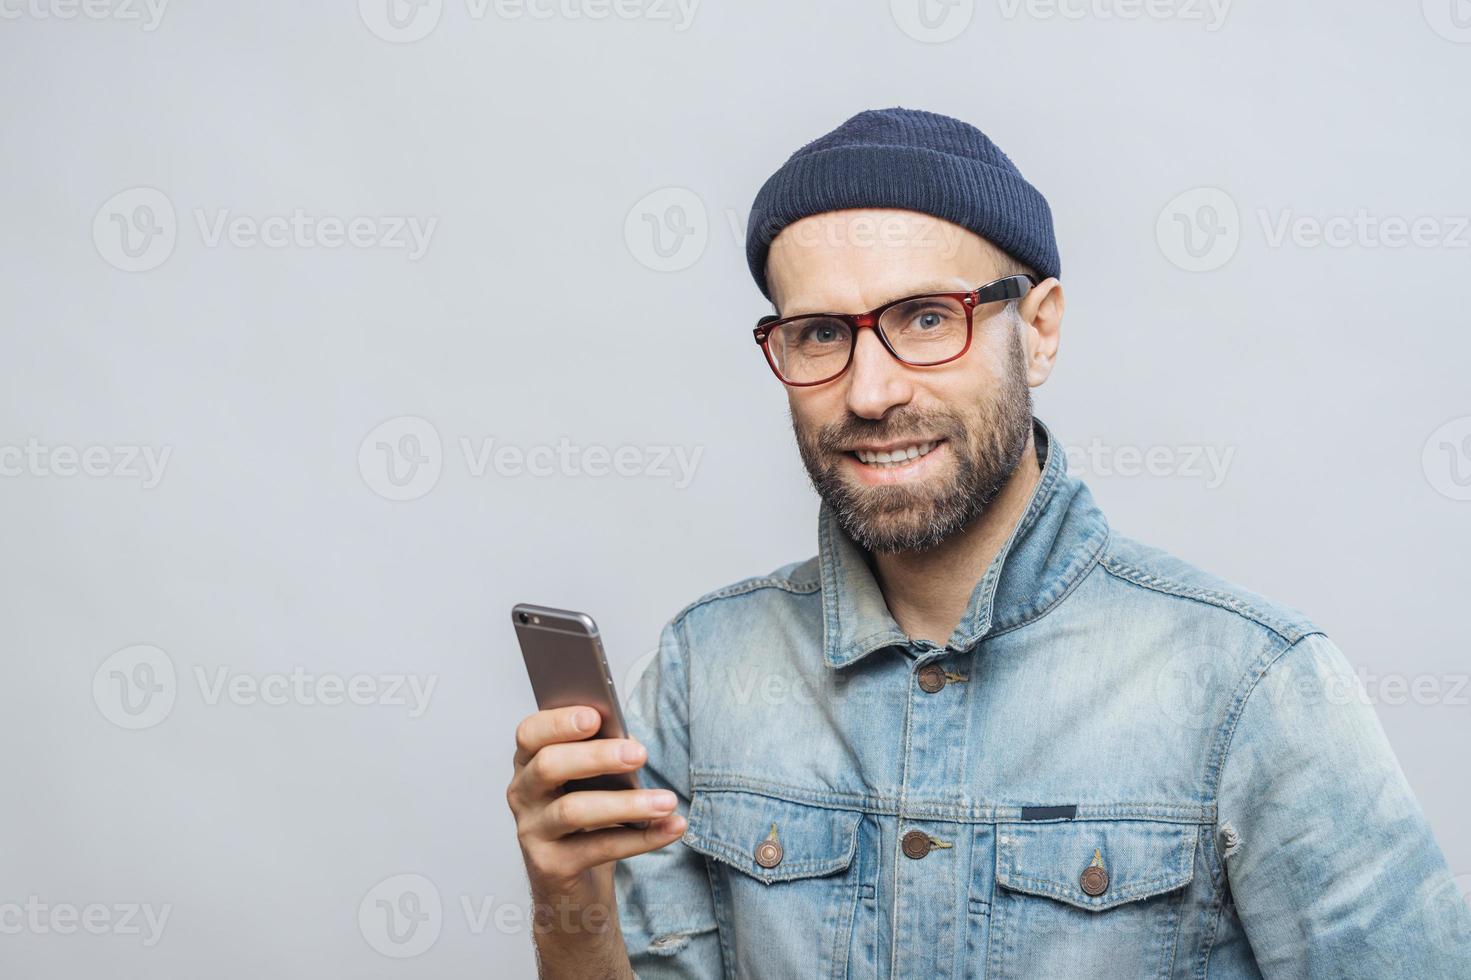 Stusio shot of happy bearded man with stubble holds modern smart phone in hands, enjoys online communication, connected to wireless internet, isolated over white background. Communication concept photo